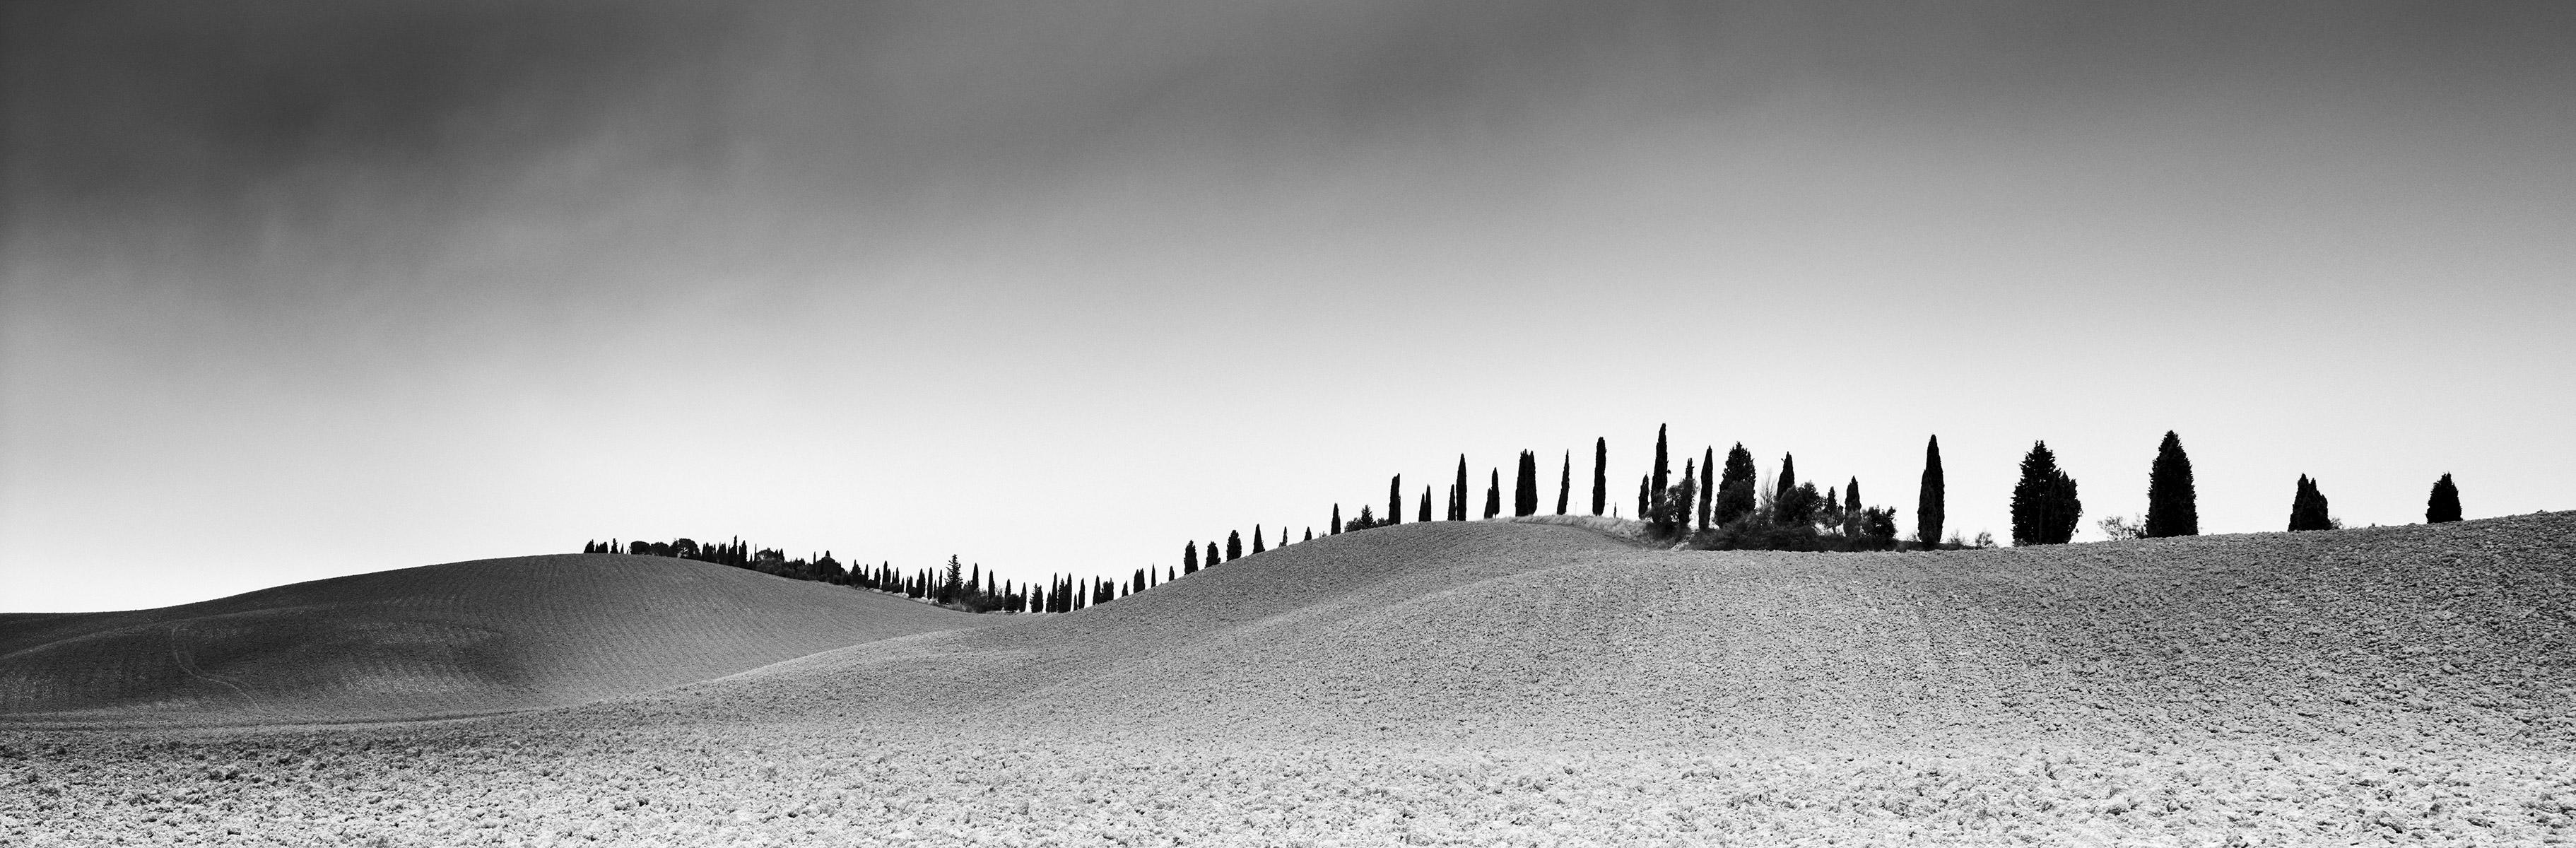 Gerald Berghammer Landscape Photograph - Cypress Trees Panorama, Tuscany, black and white fine art photography landscape